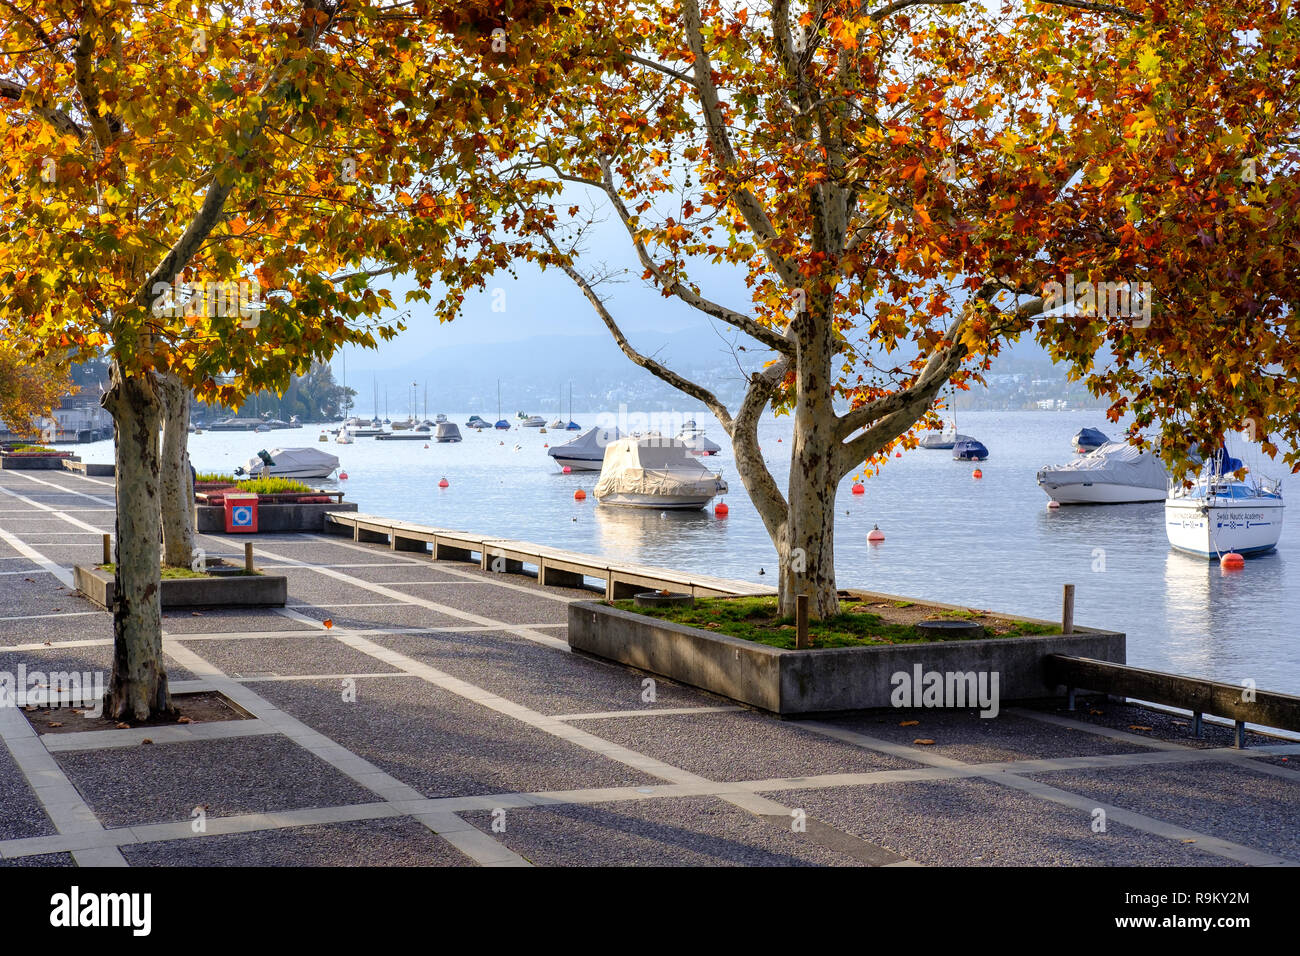 Boats near the shore of Lake Zurich, Zurich, Switzerland. in Fall 2018 Stock Photo